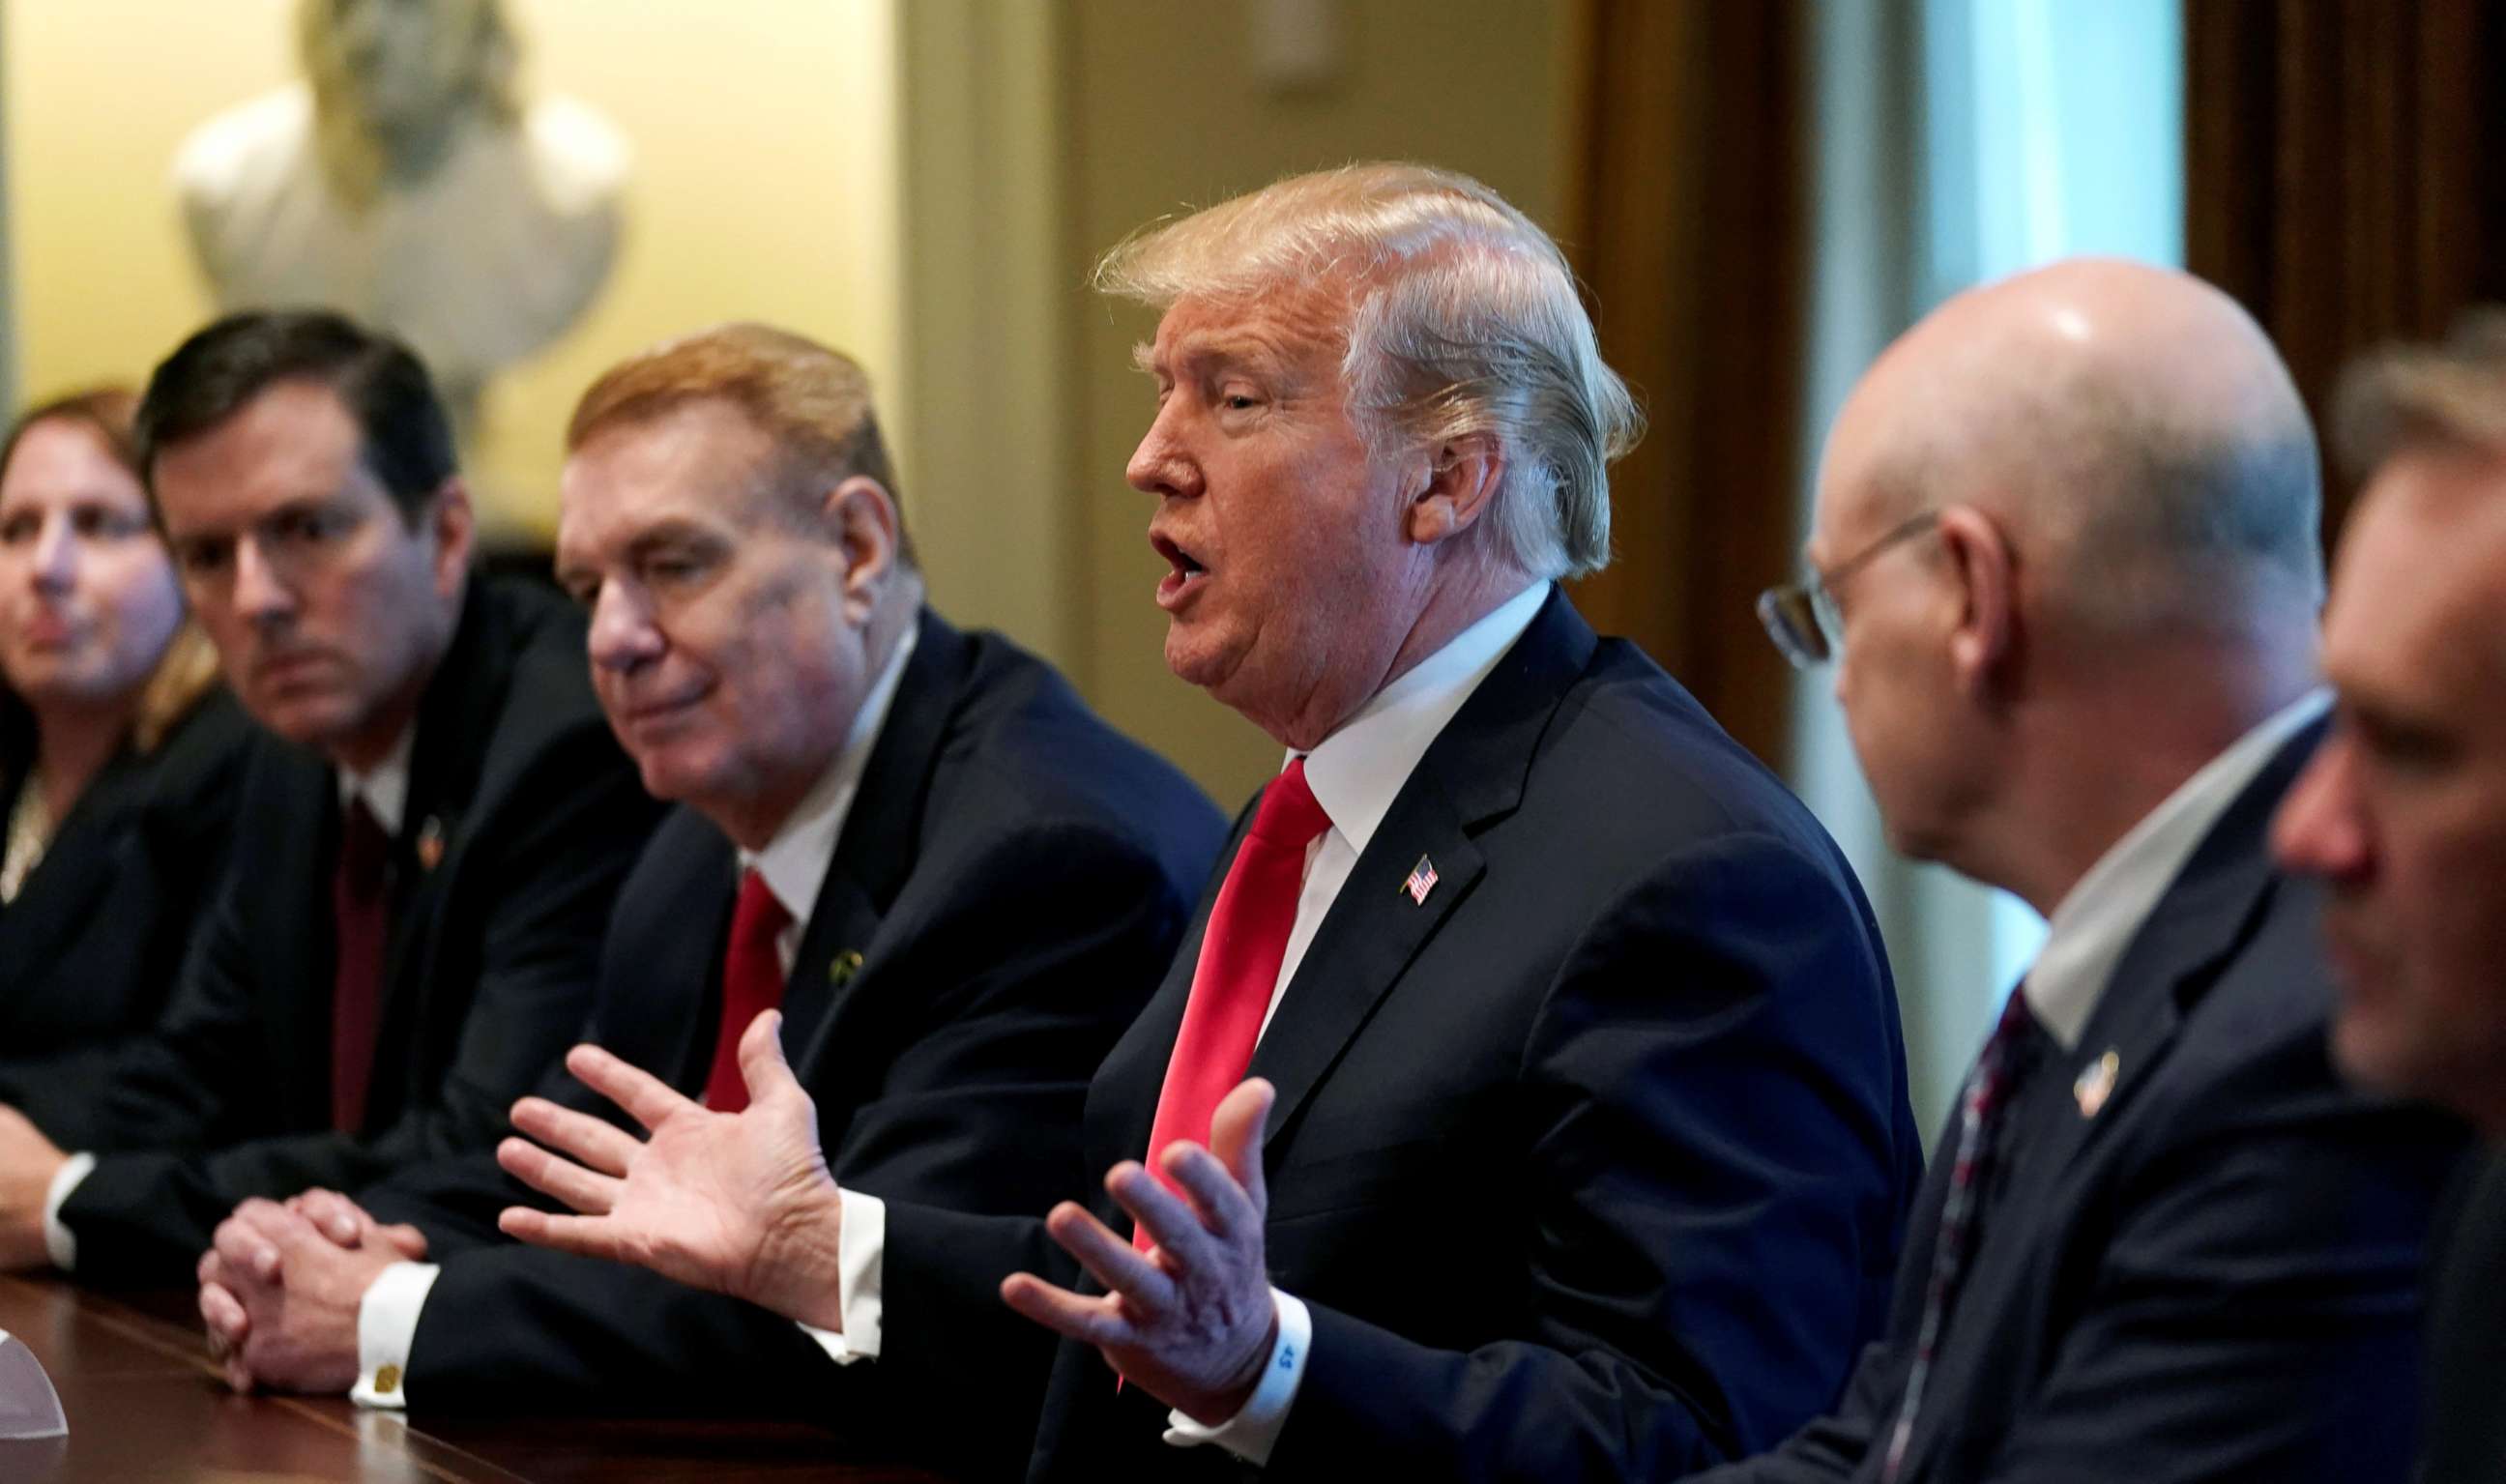 PHOTO: President Donald Trump announces the U.S. will impose tariffs of 25 percent on steel imports and 10 percent on imported aluminum during a meeting at the White House in Washington, D.C., March 1, 2018. 